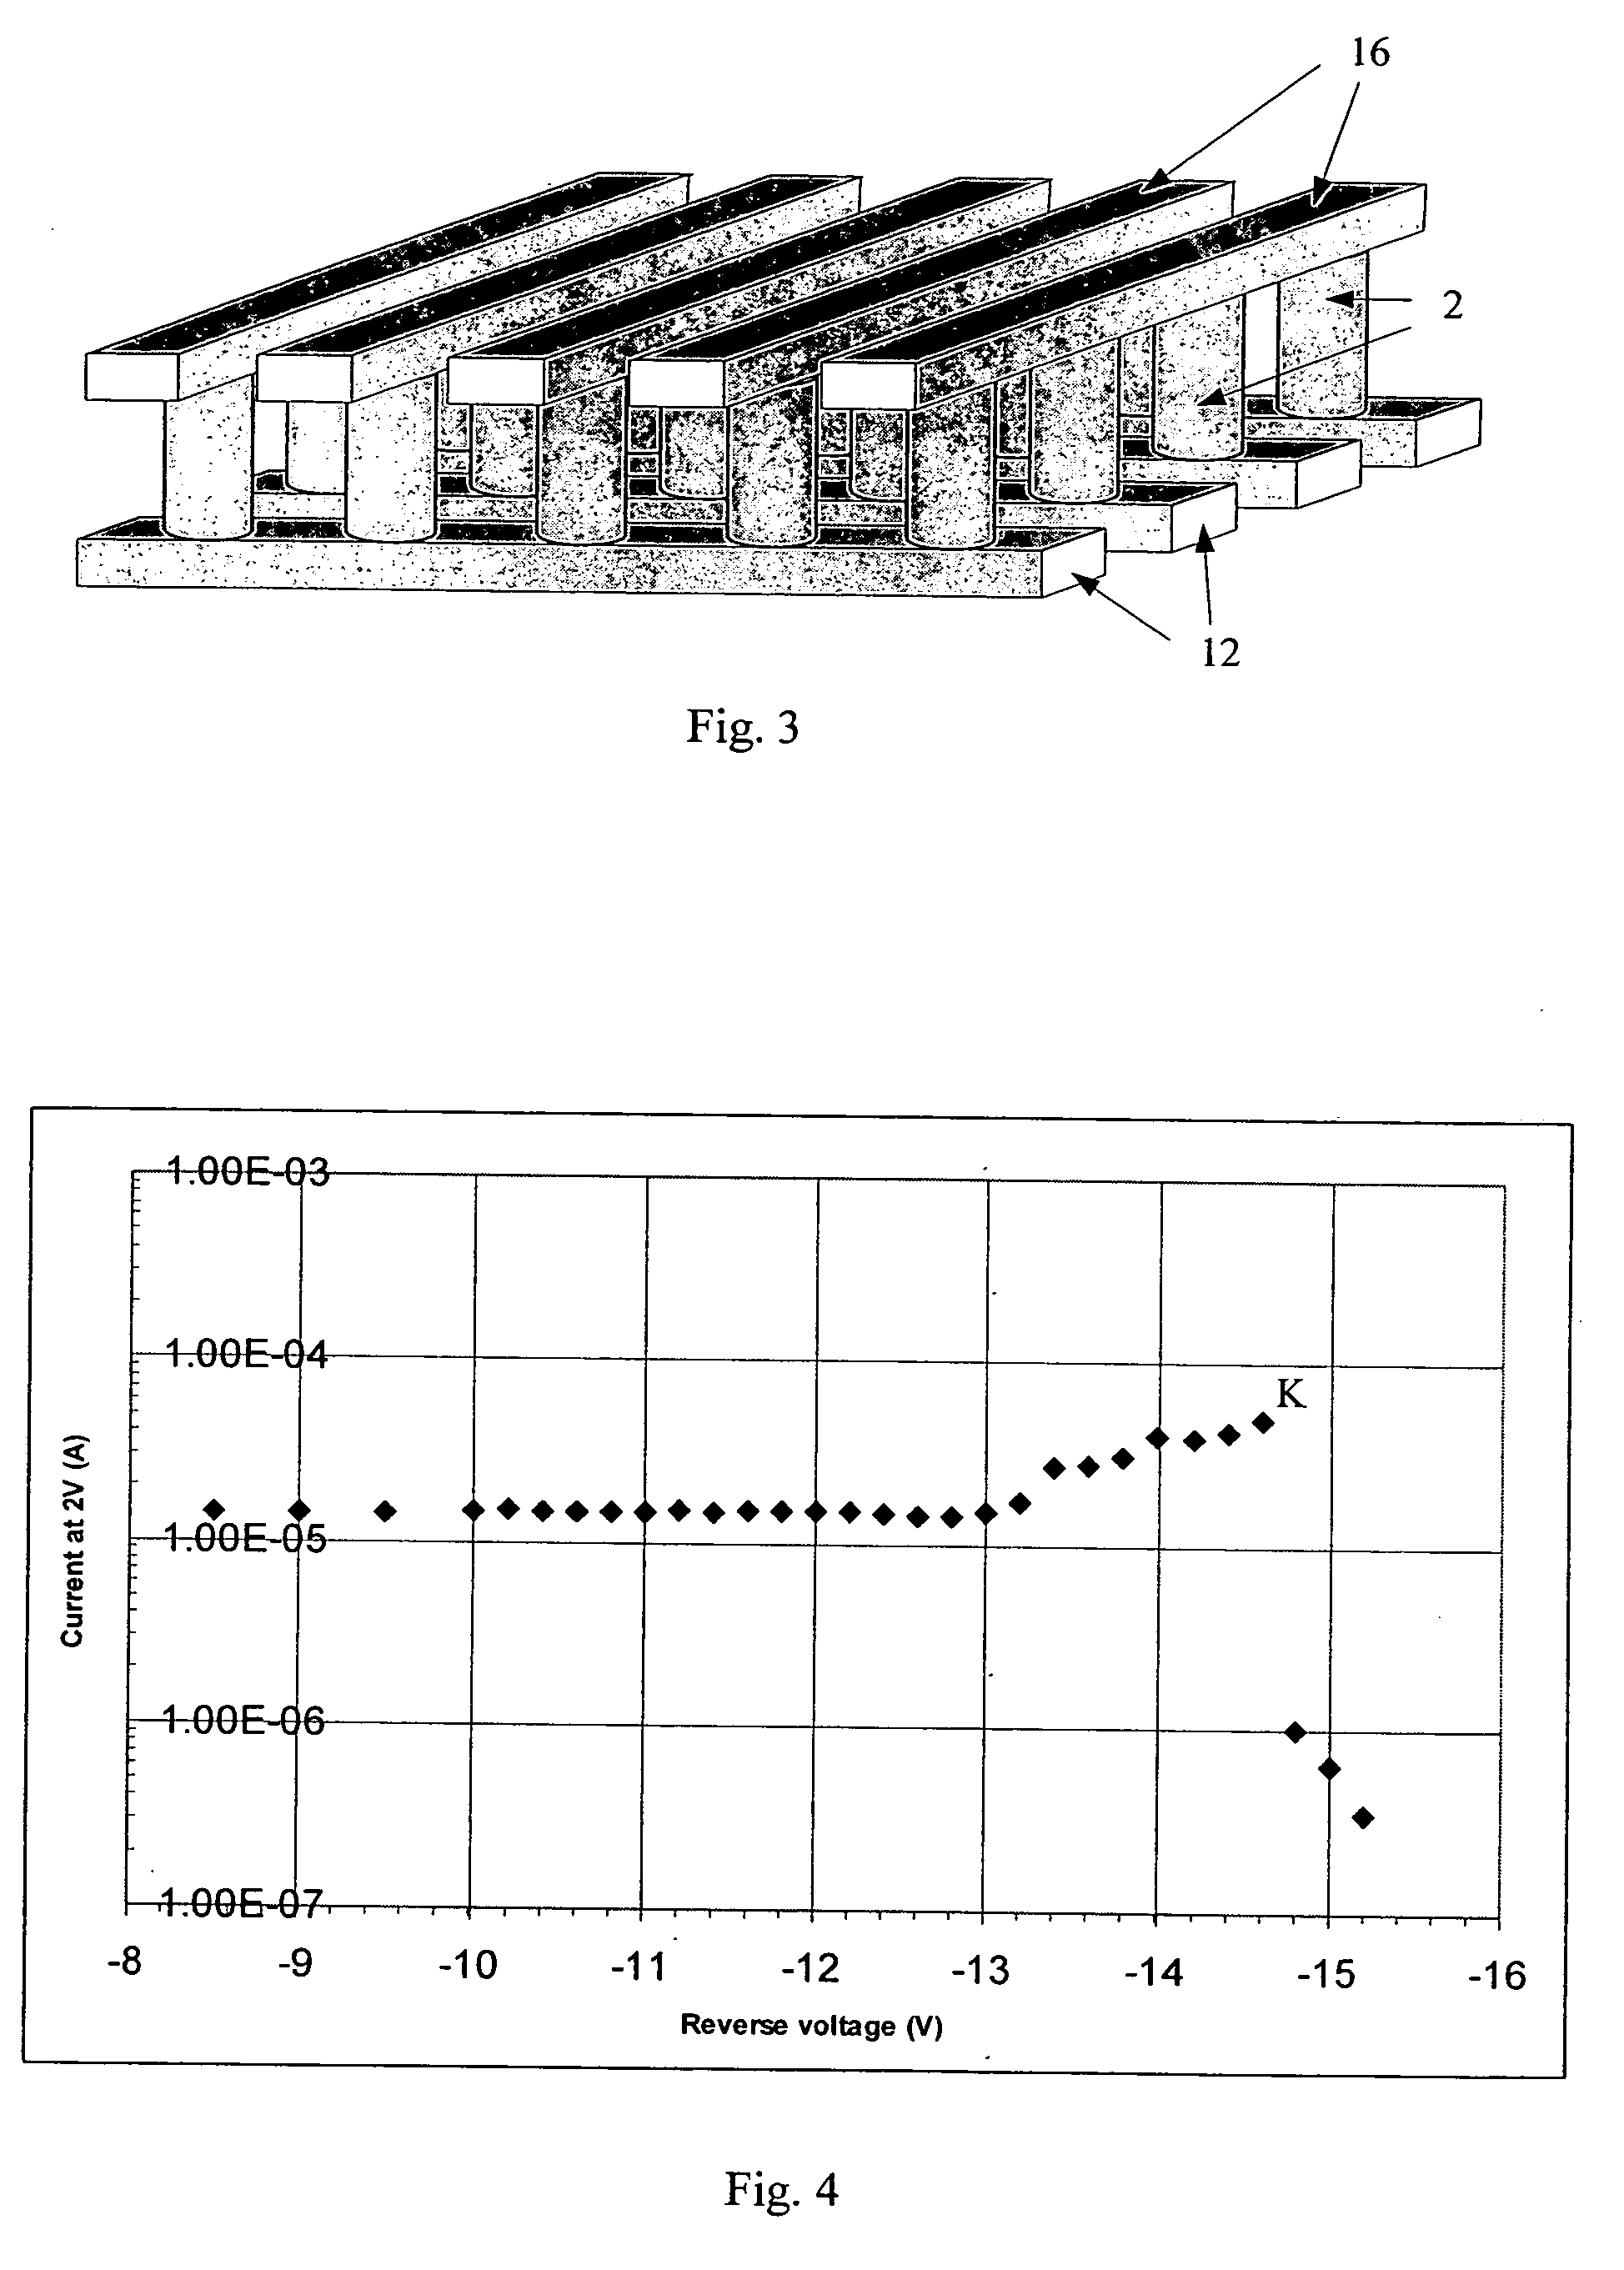 Method for using a multi-use memory cell and memory array